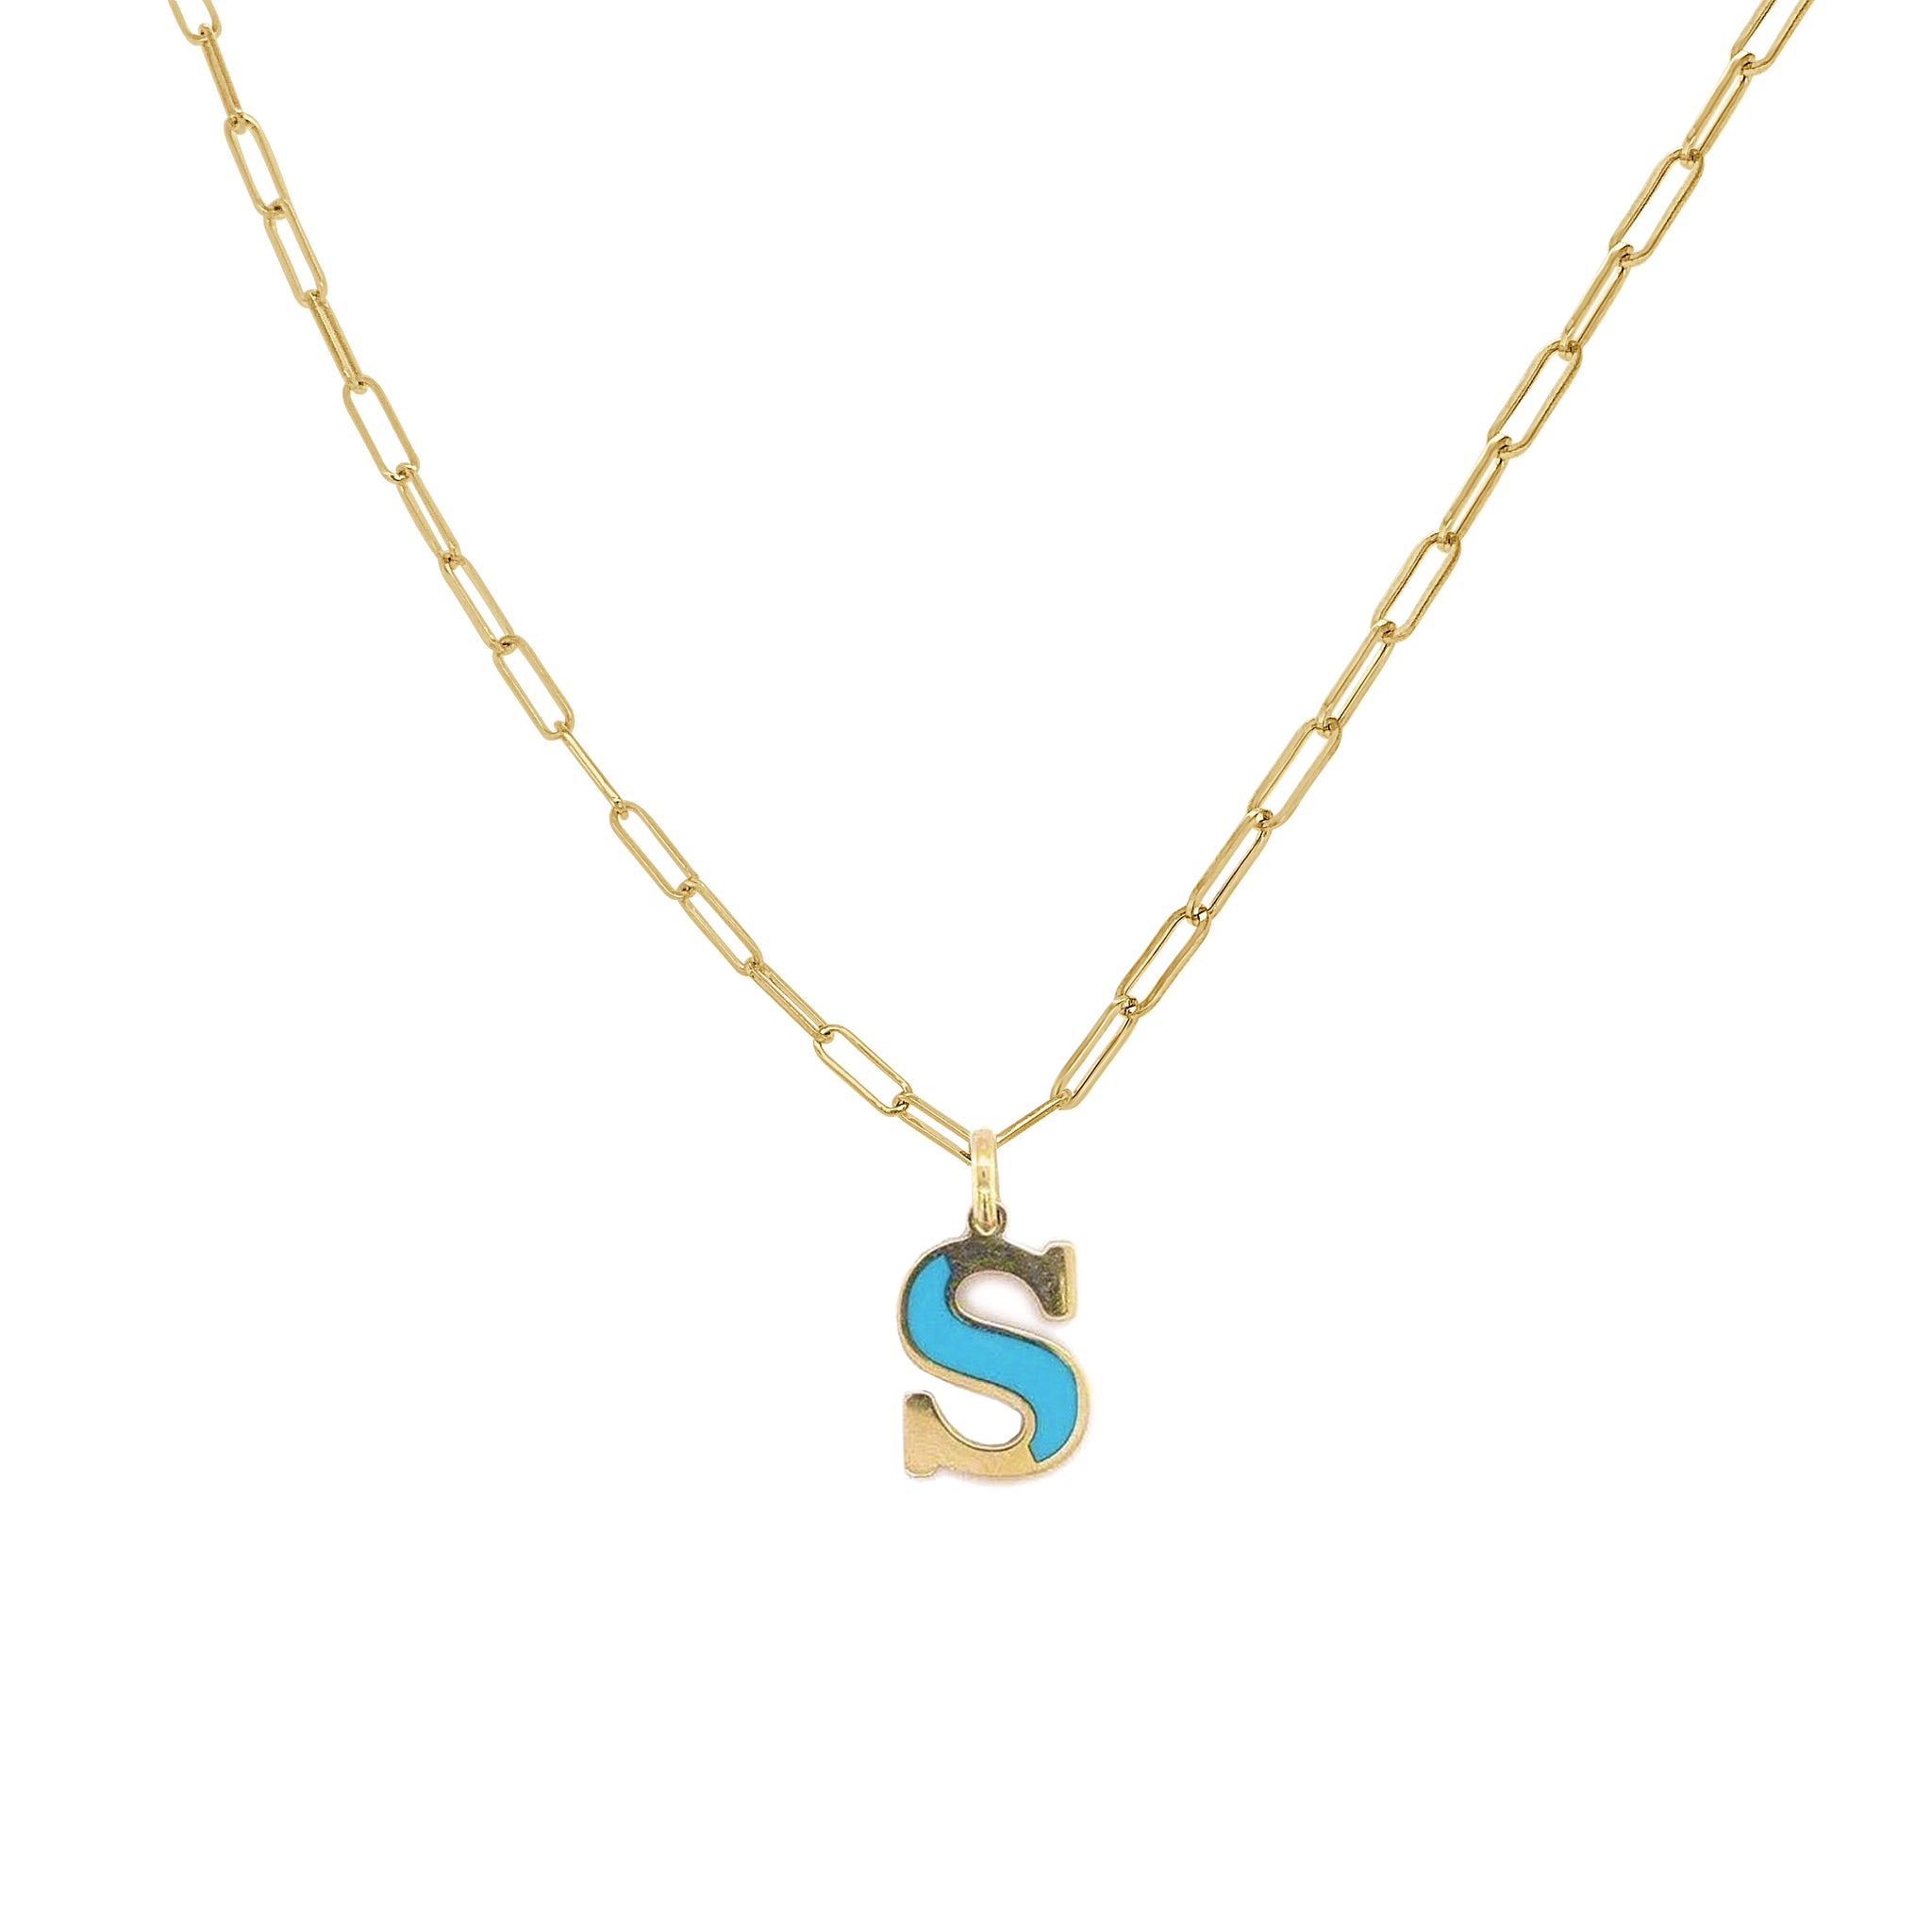 Initial Necklace: Chains and Charms - Blue Windows